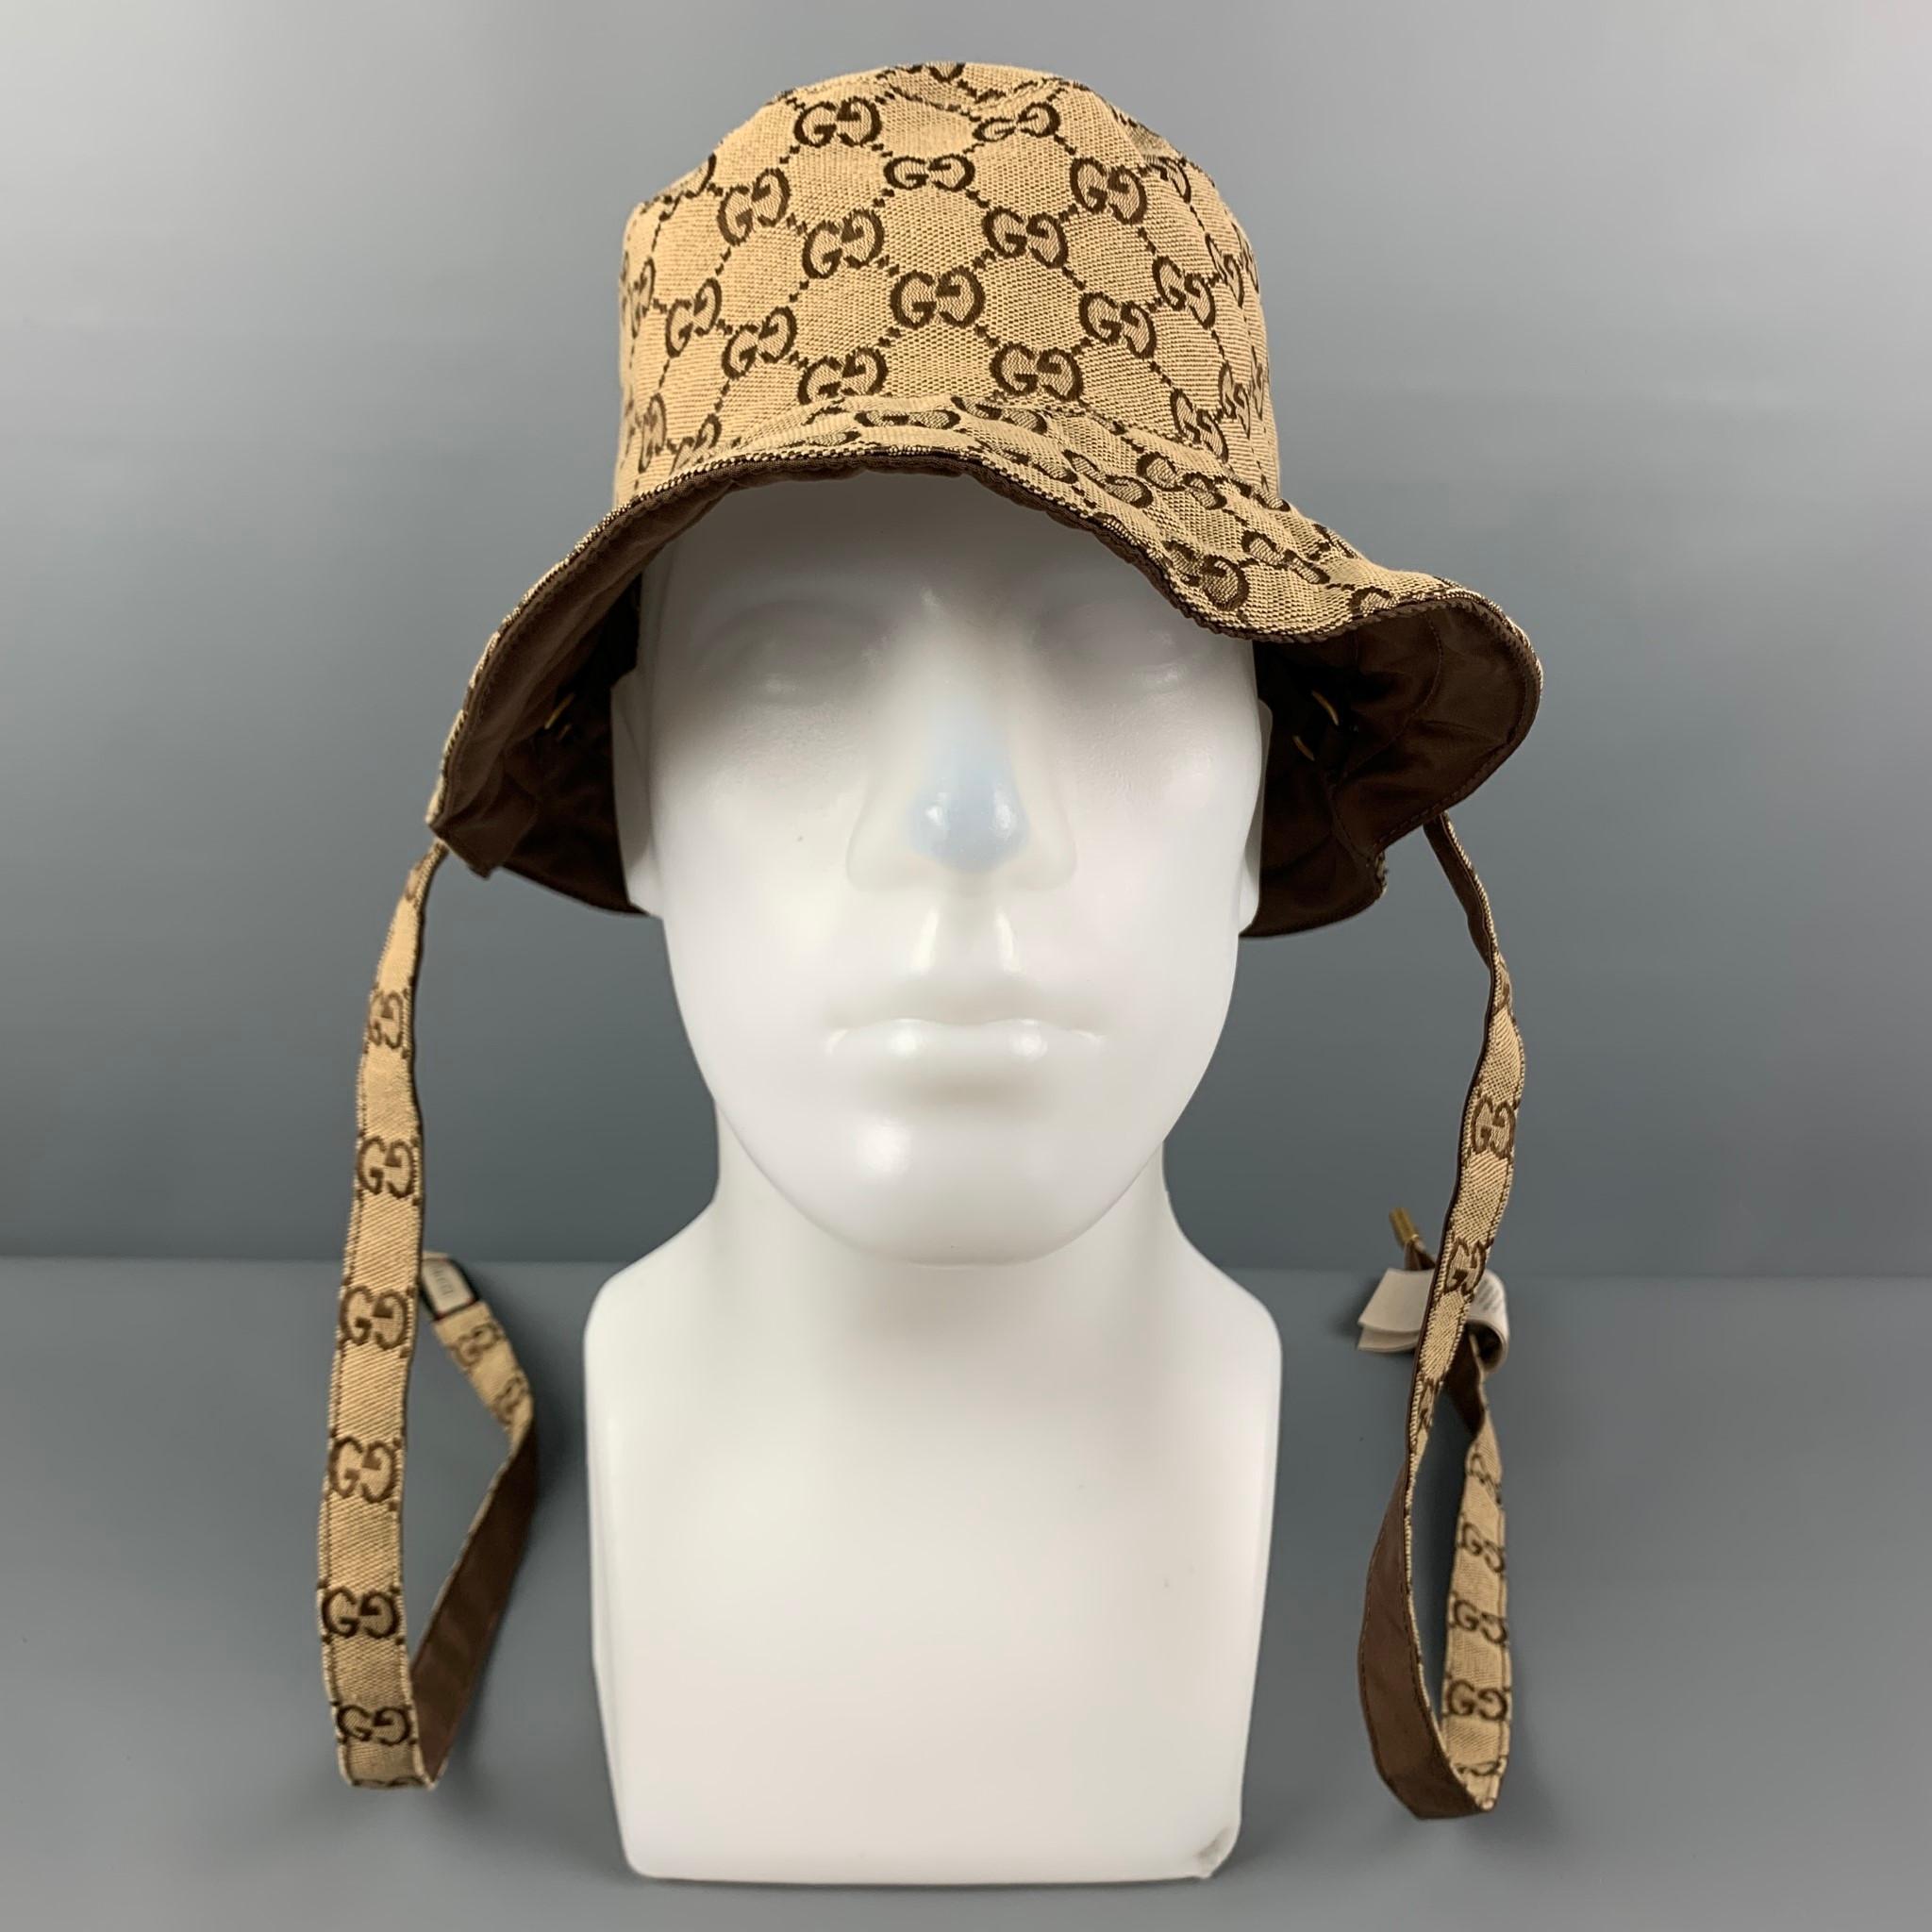 GUCCI bucket hat come in a tan & brown monogram canvas featuring a reversible style and long strap details. Includes dust bag. Made in Italy. 

Excellent Pre-Owned Condition.
Marked: XL

Measurements:

Opening: 22.5 in.
Brim: 2.5 in.
Height: 3.5 in.
